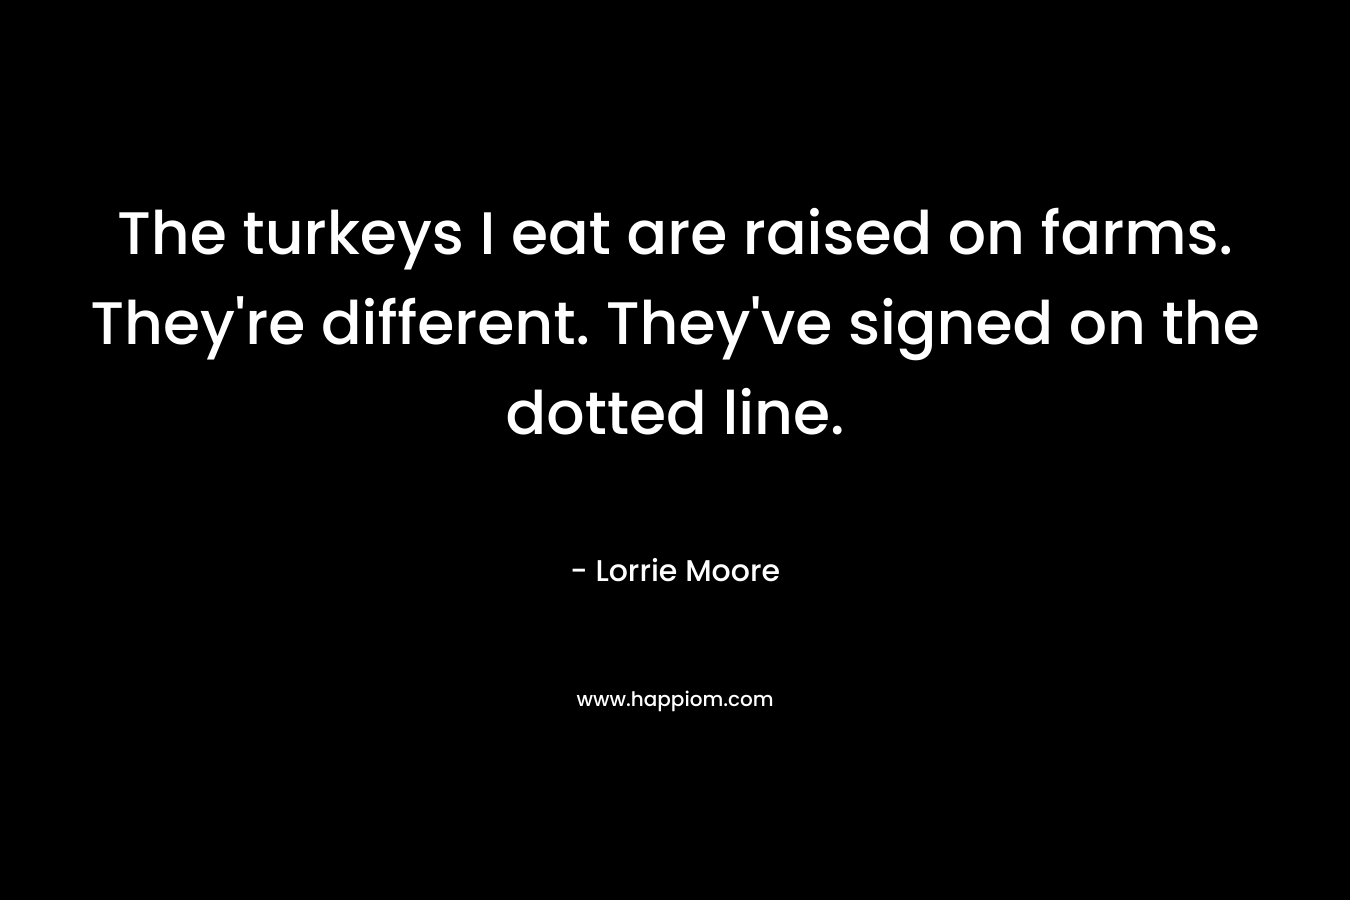 The turkeys I eat are raised on farms. They’re different. They’ve signed on the dotted line. – Lorrie Moore